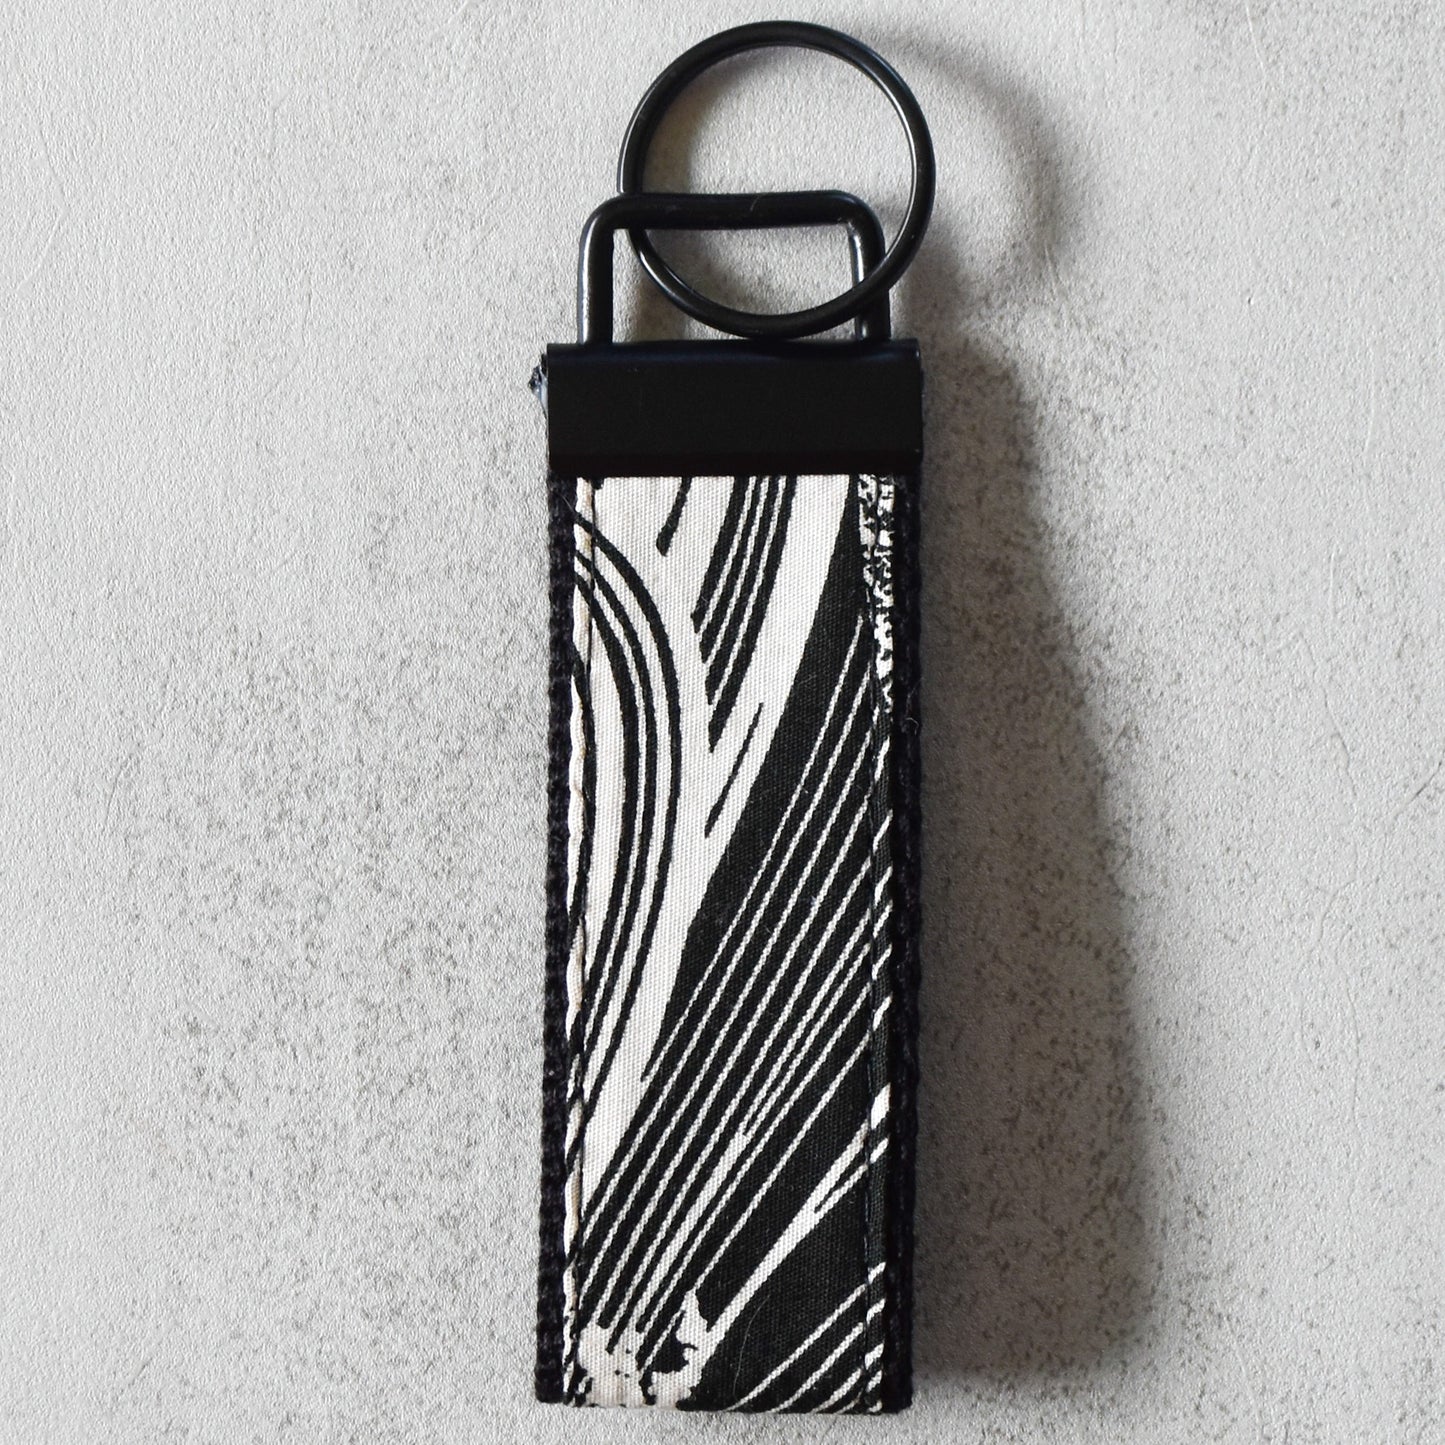 Go With The Flow Key Fobs